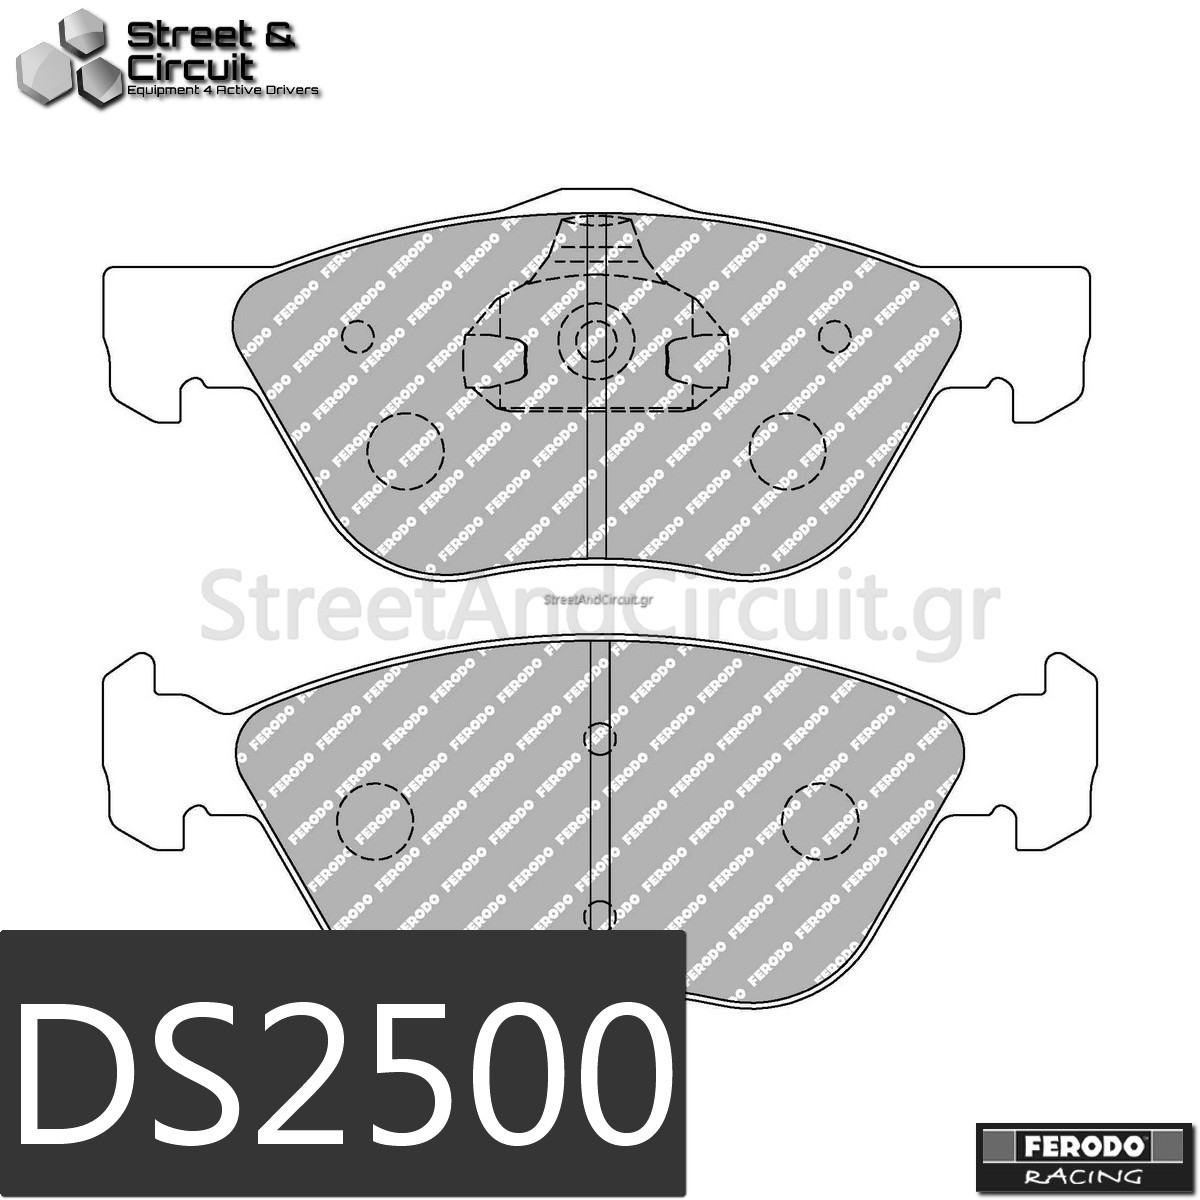 2.5 V6 155 1992-1997 (FRONT), Brake System: ATE - Ferodo Racing Τακάκια *DS2500*